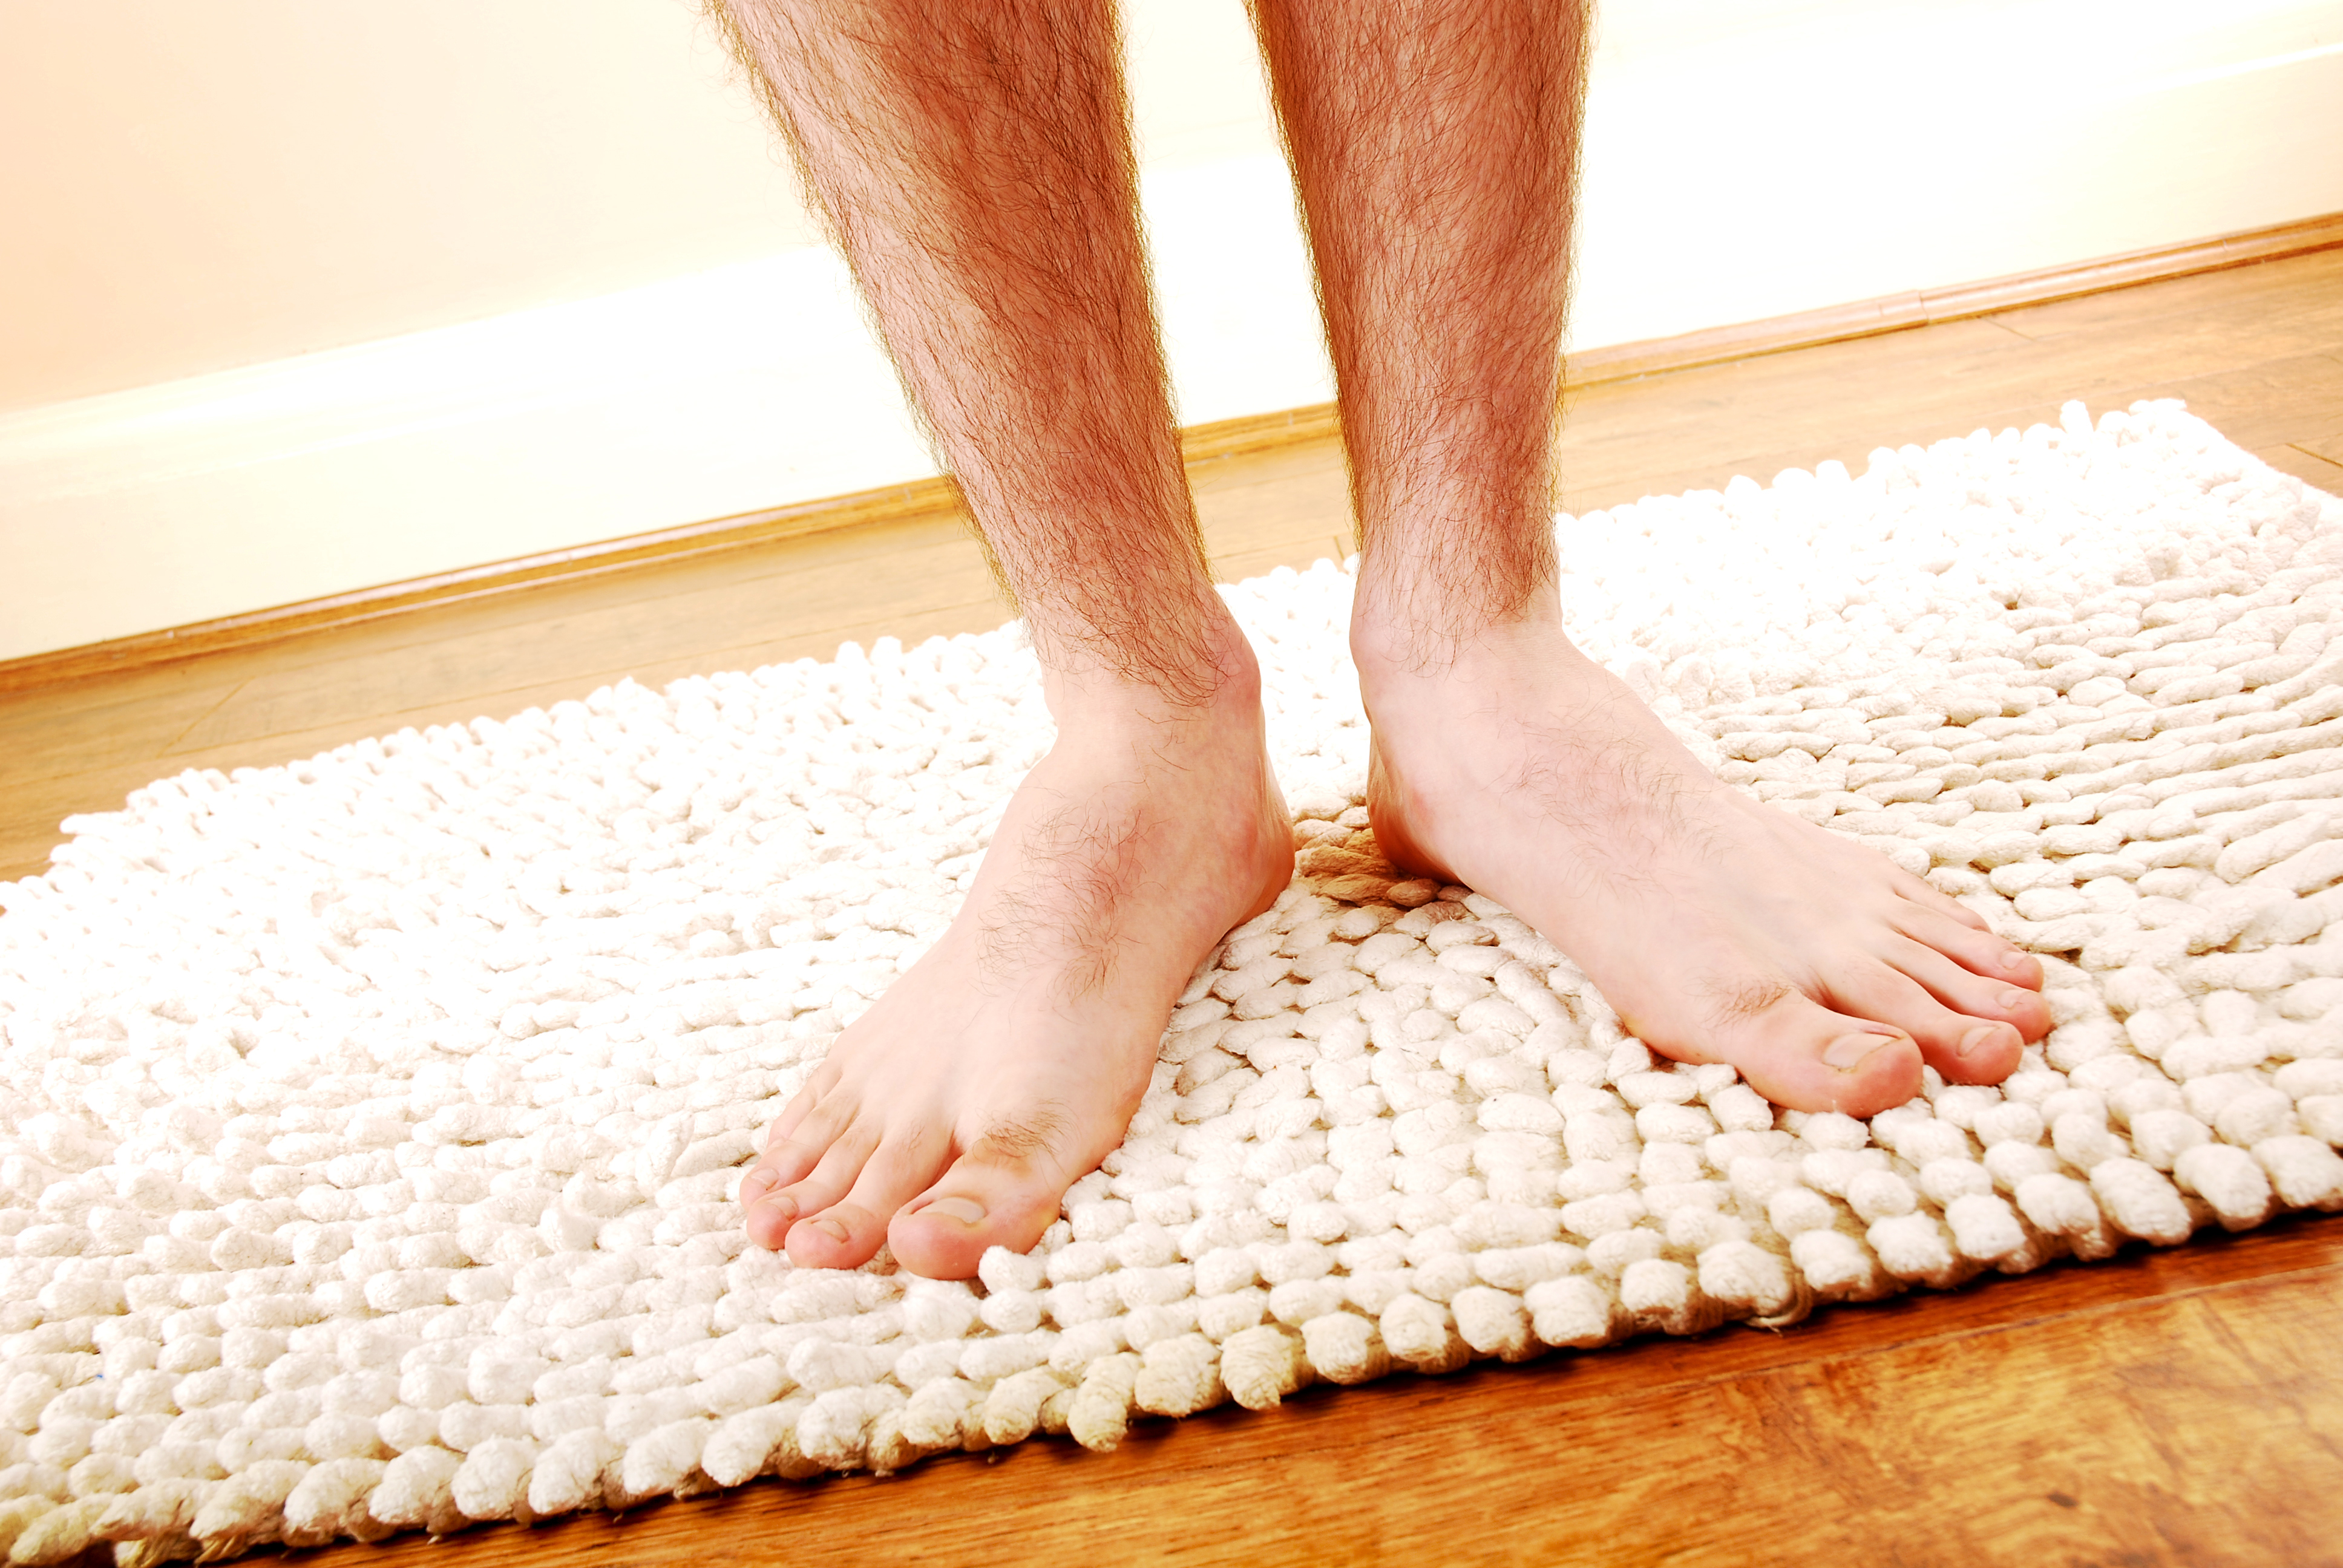 Expert's Guide to Washing Bathroom Rugs Safely